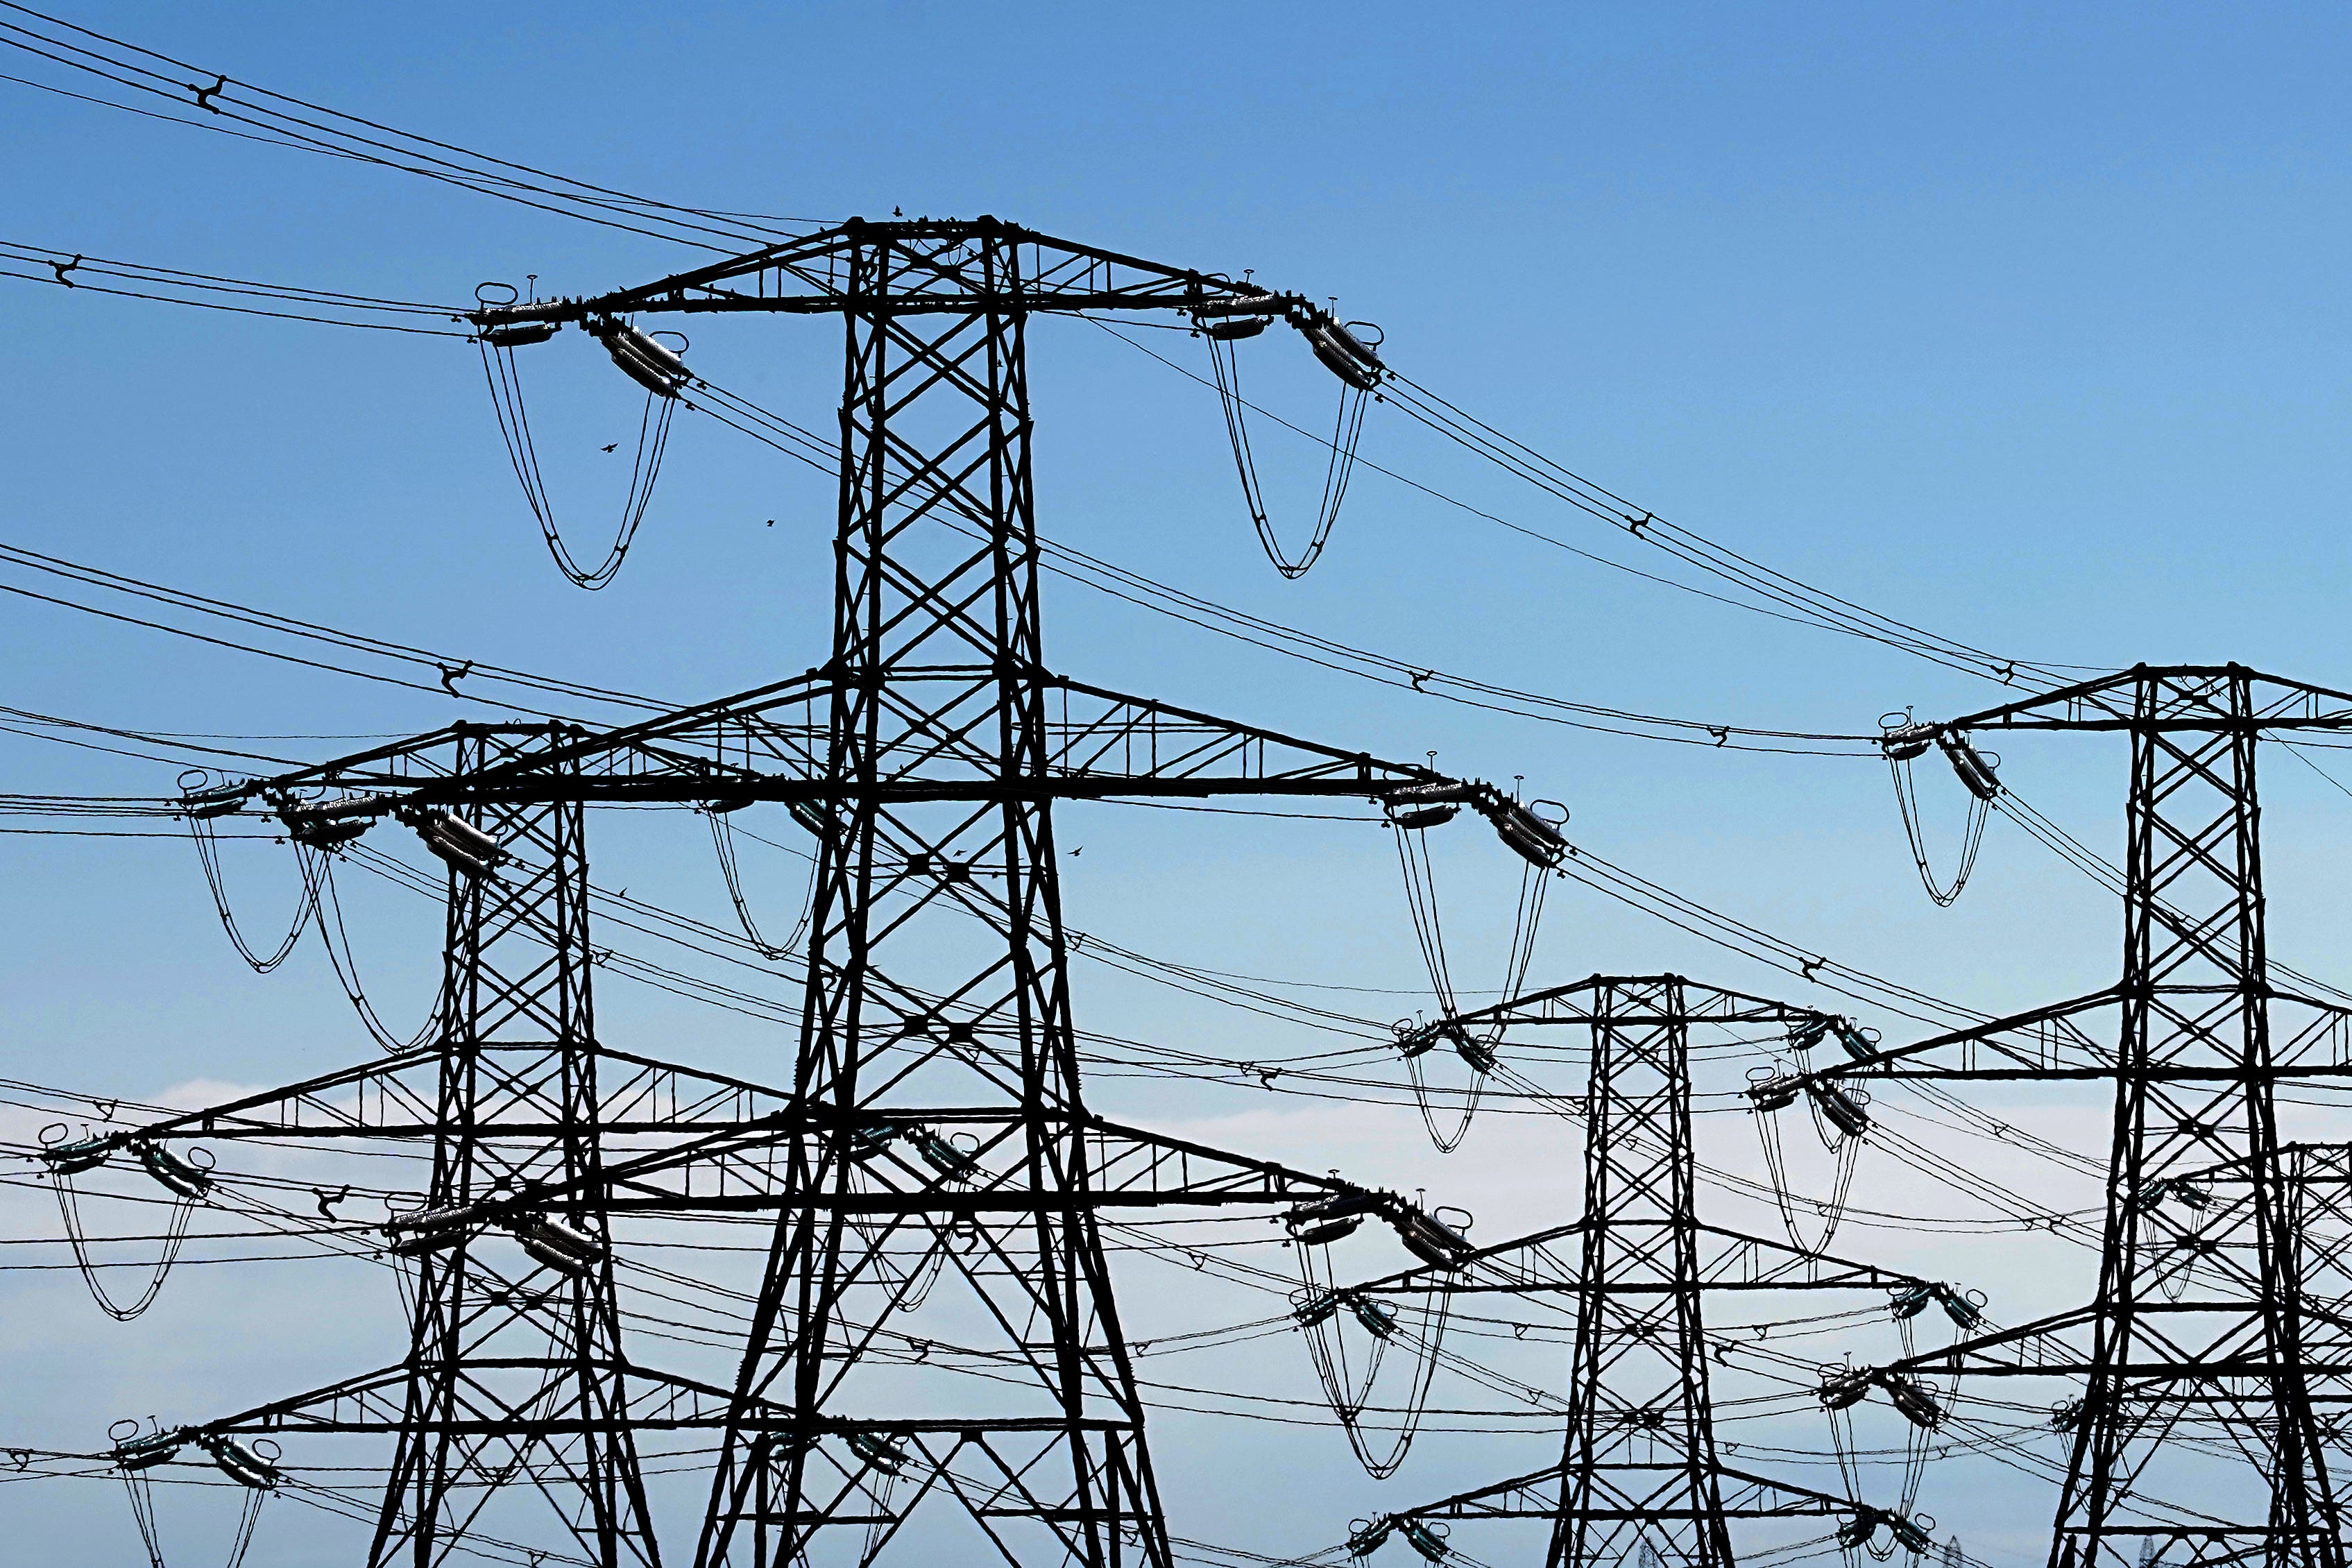 There should be enough electricity this winter, national Grid ESO said (Gareth Fuller/PA)